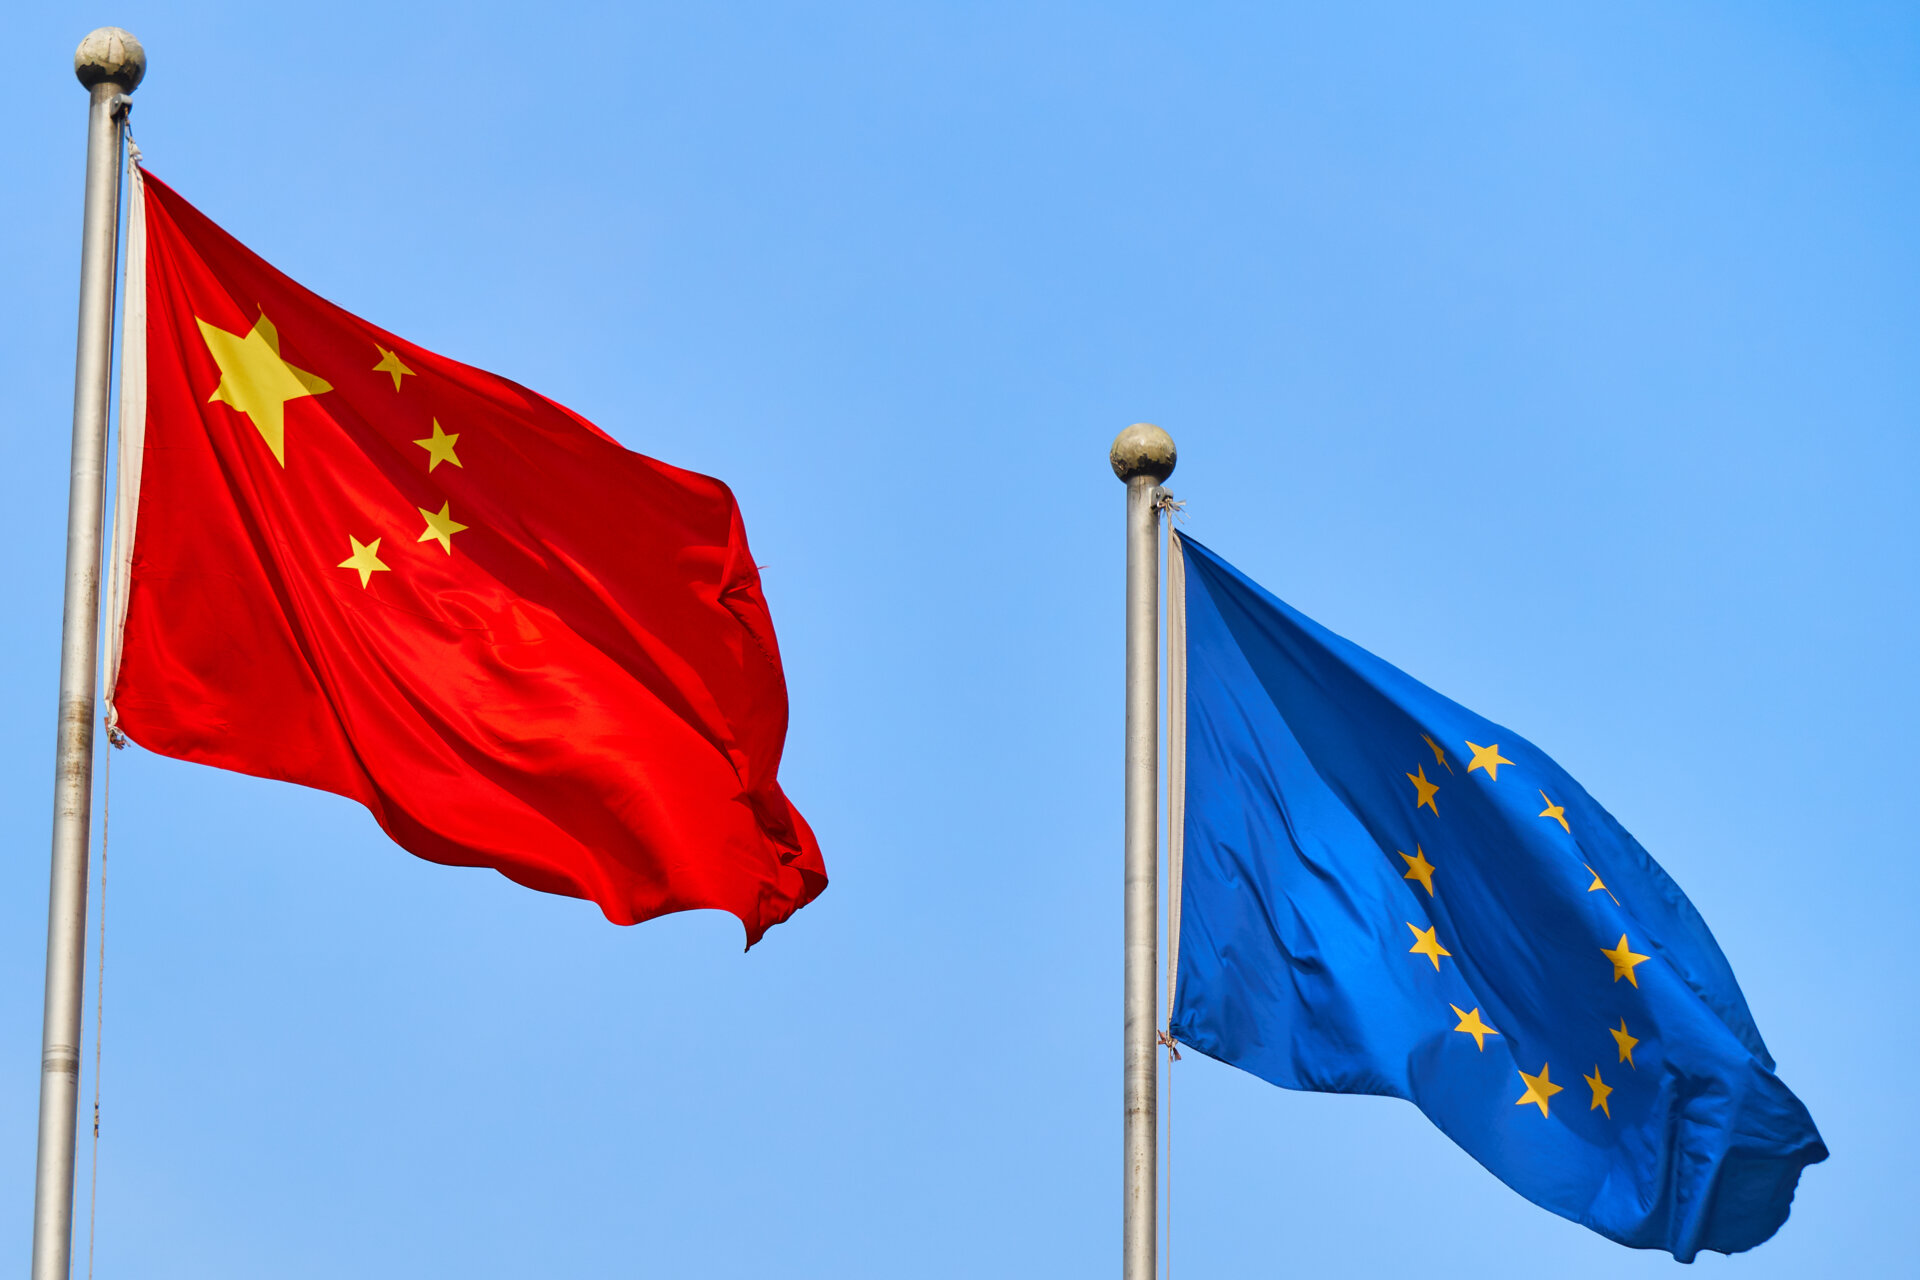 Chinese and European Union flags